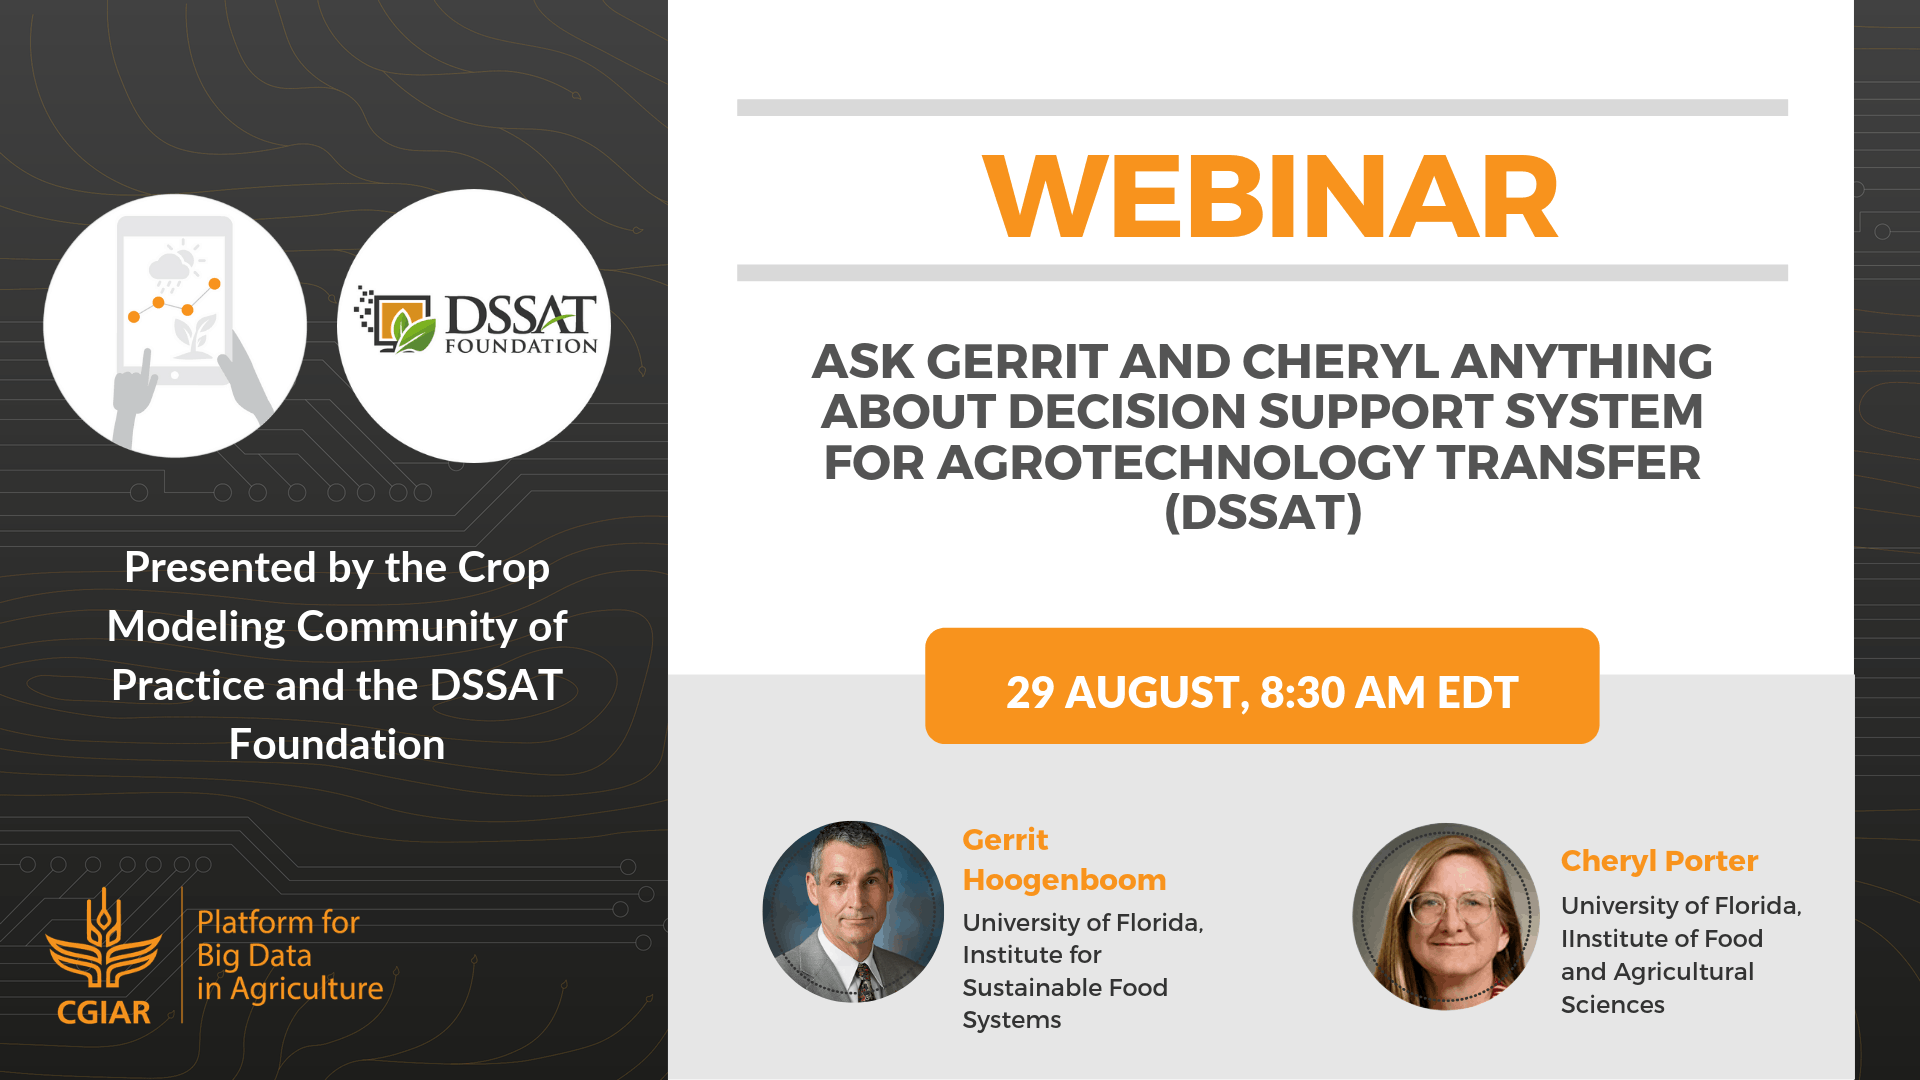 Webinar - Ask Gerrit and Cheryl Anything about DSSAT